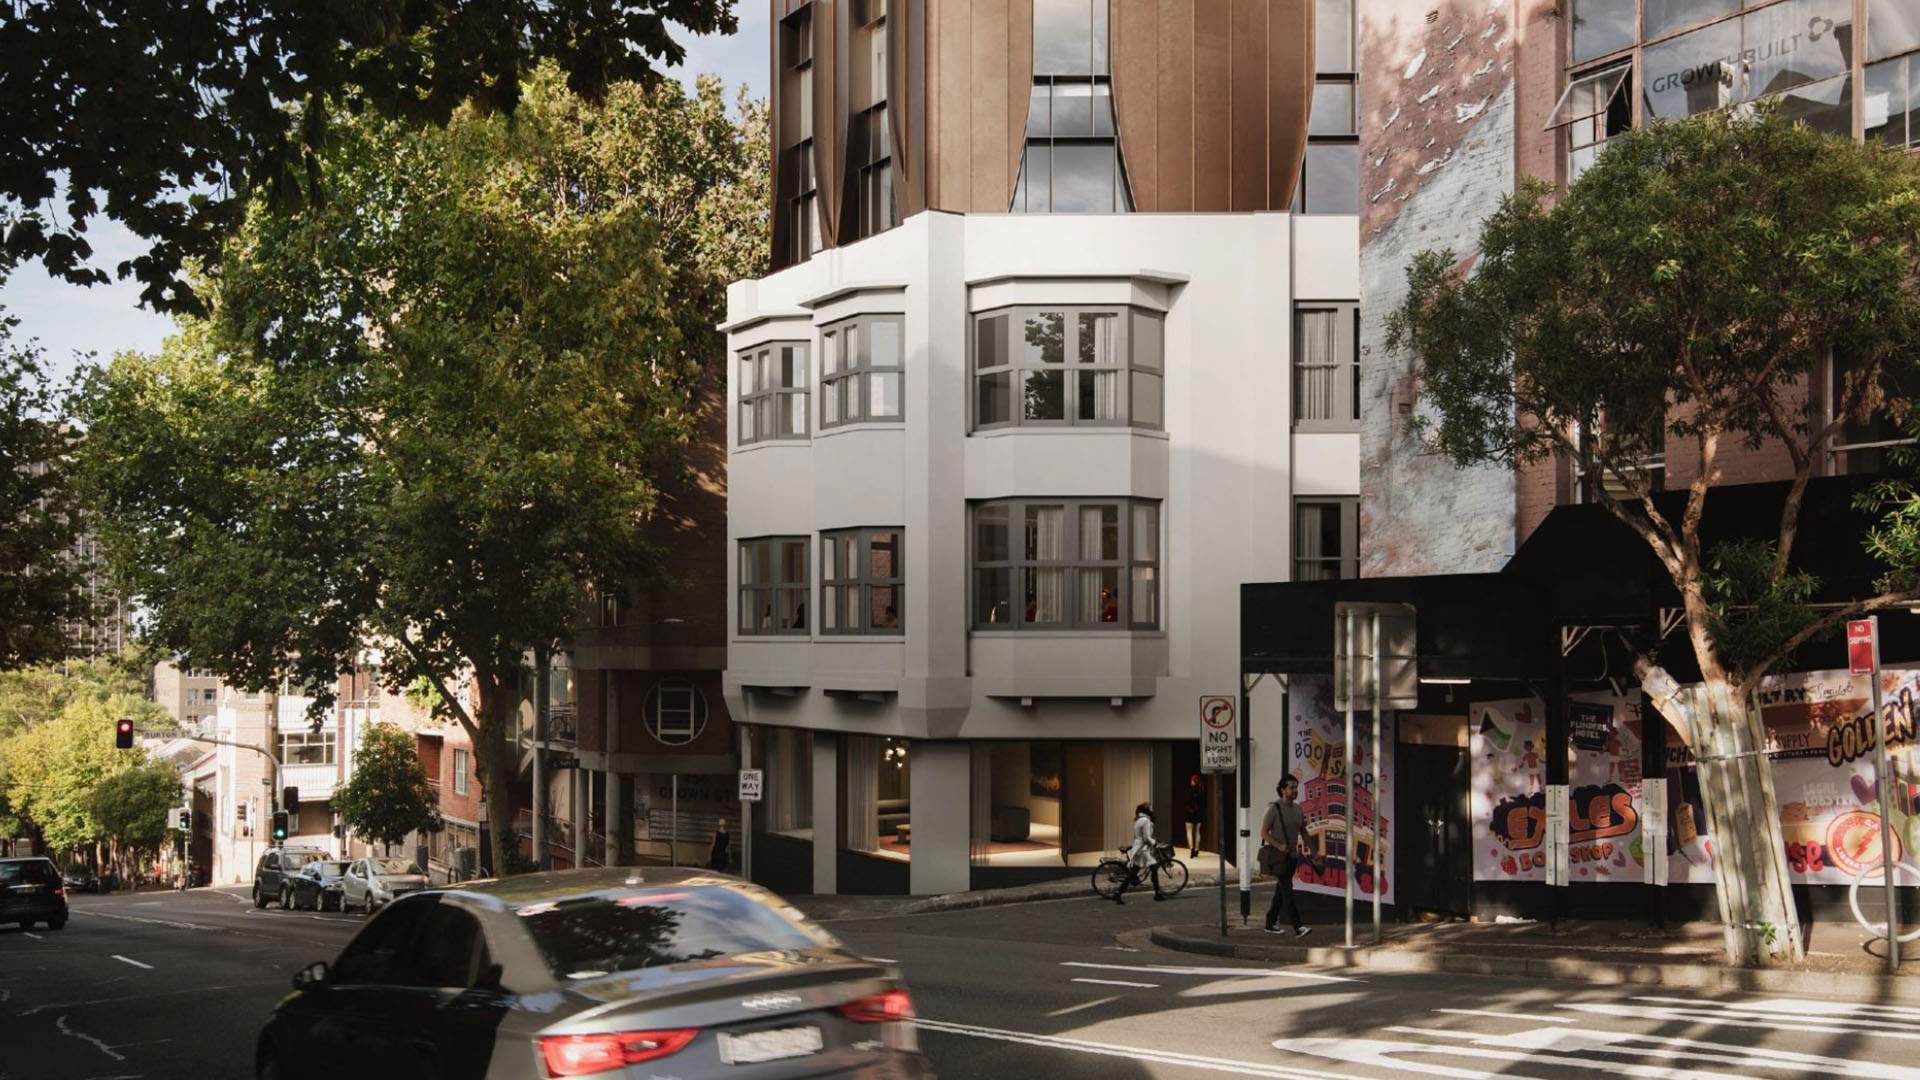 Soho House Has Lodged Plans for Its First Ultra-Exclusive Australian Location in Sydney